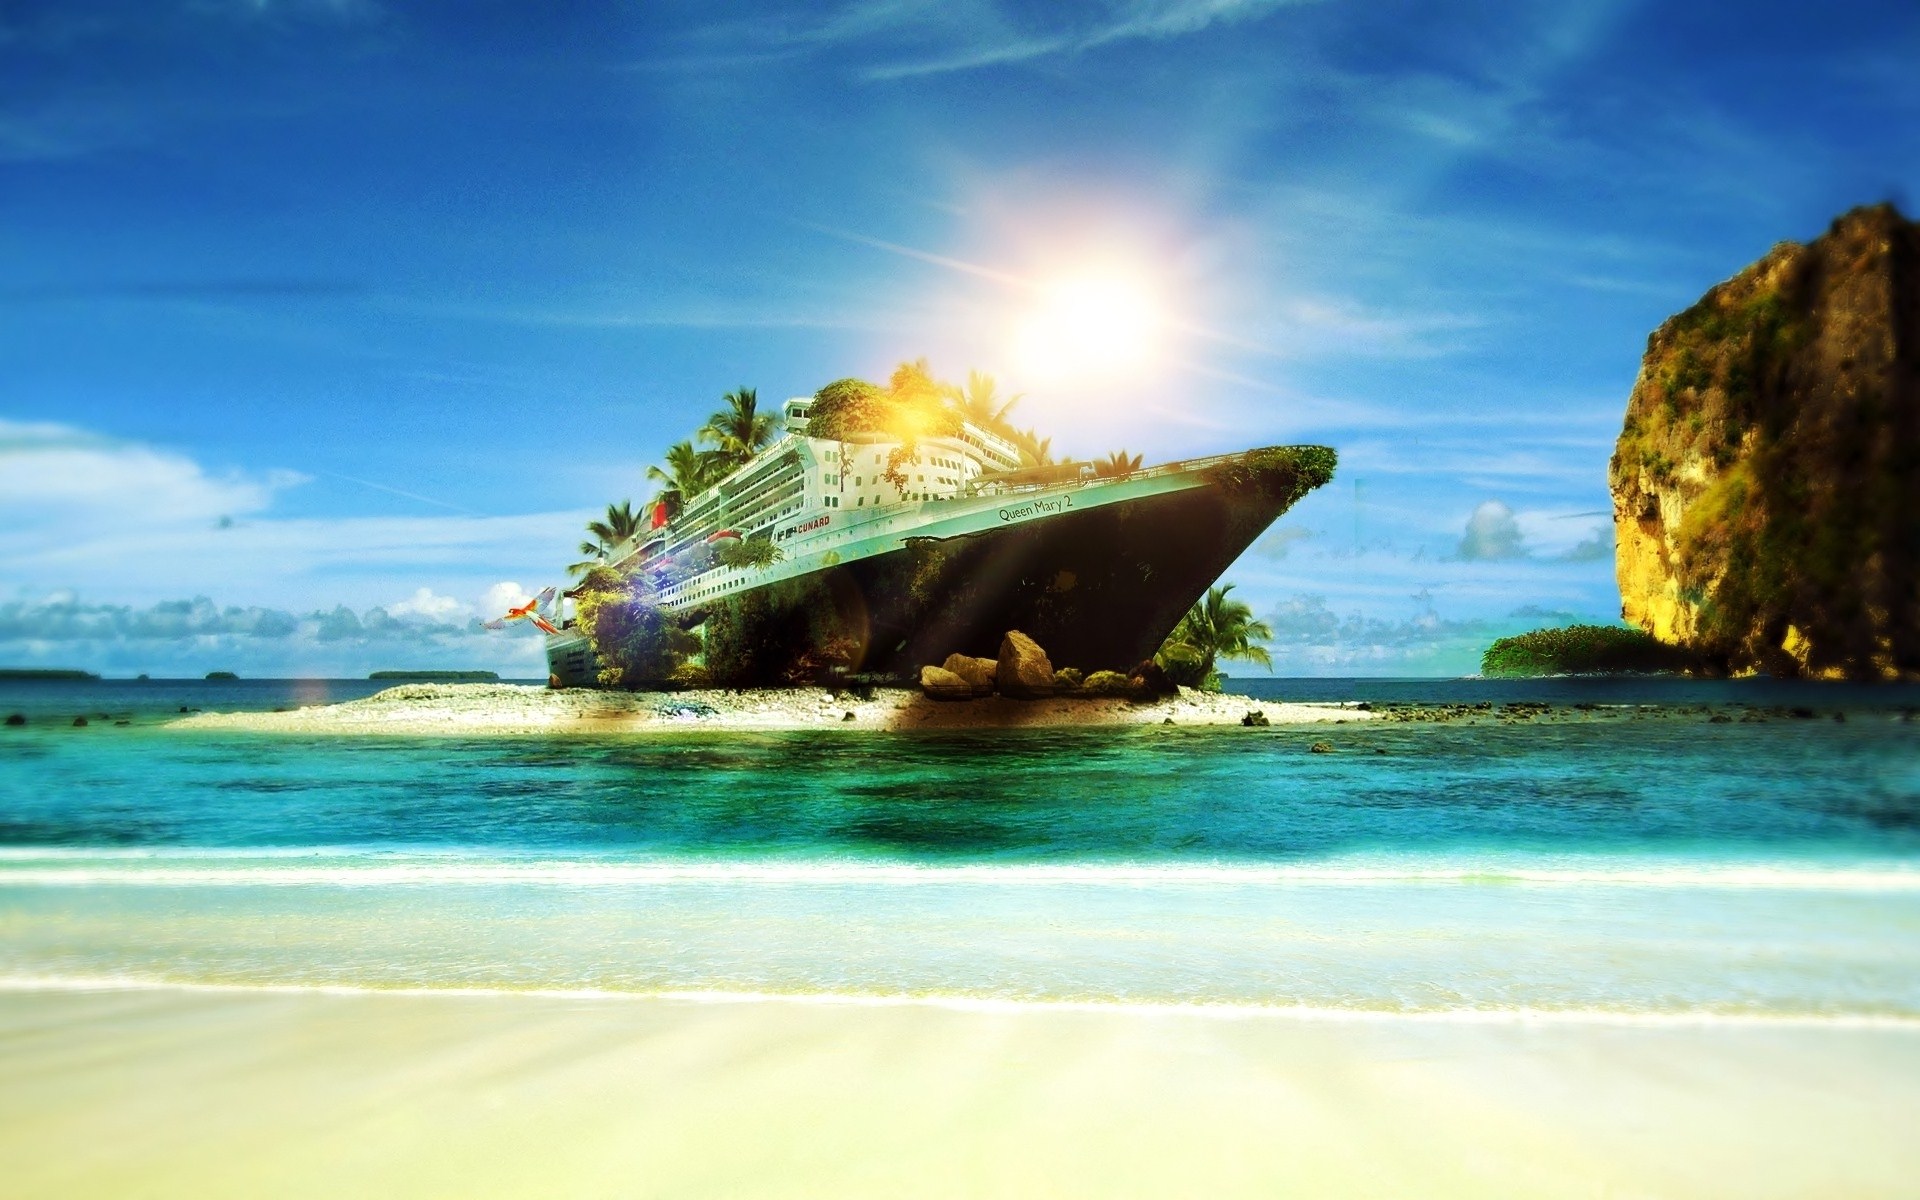 Ship On The Ocean Artistic Wallpapers